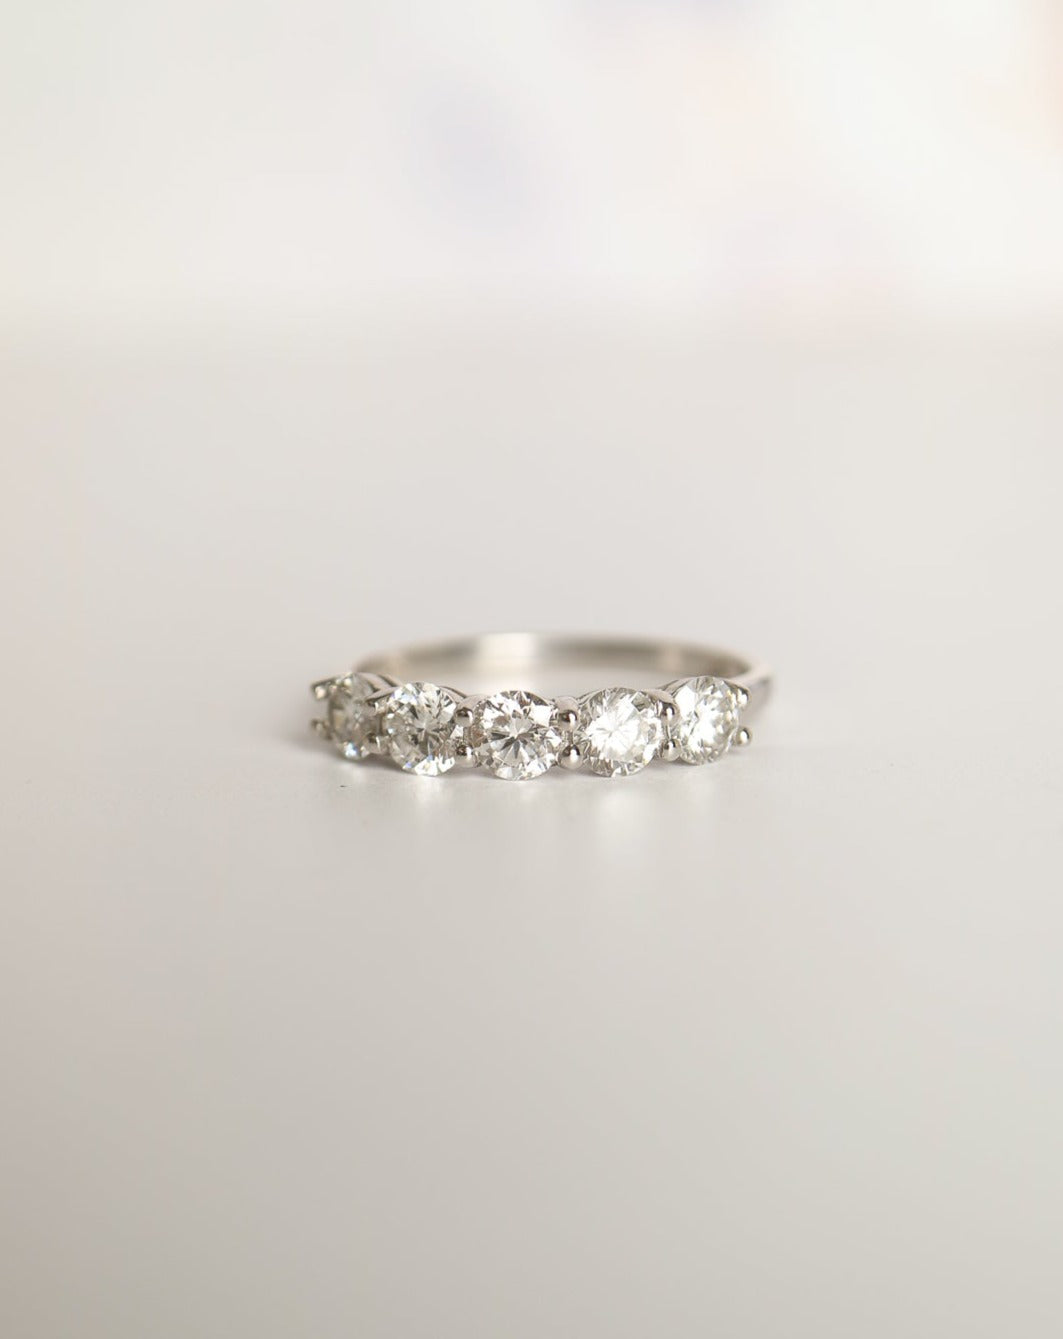 9ct white gold engagement ring wedding band with lab grown diamonds